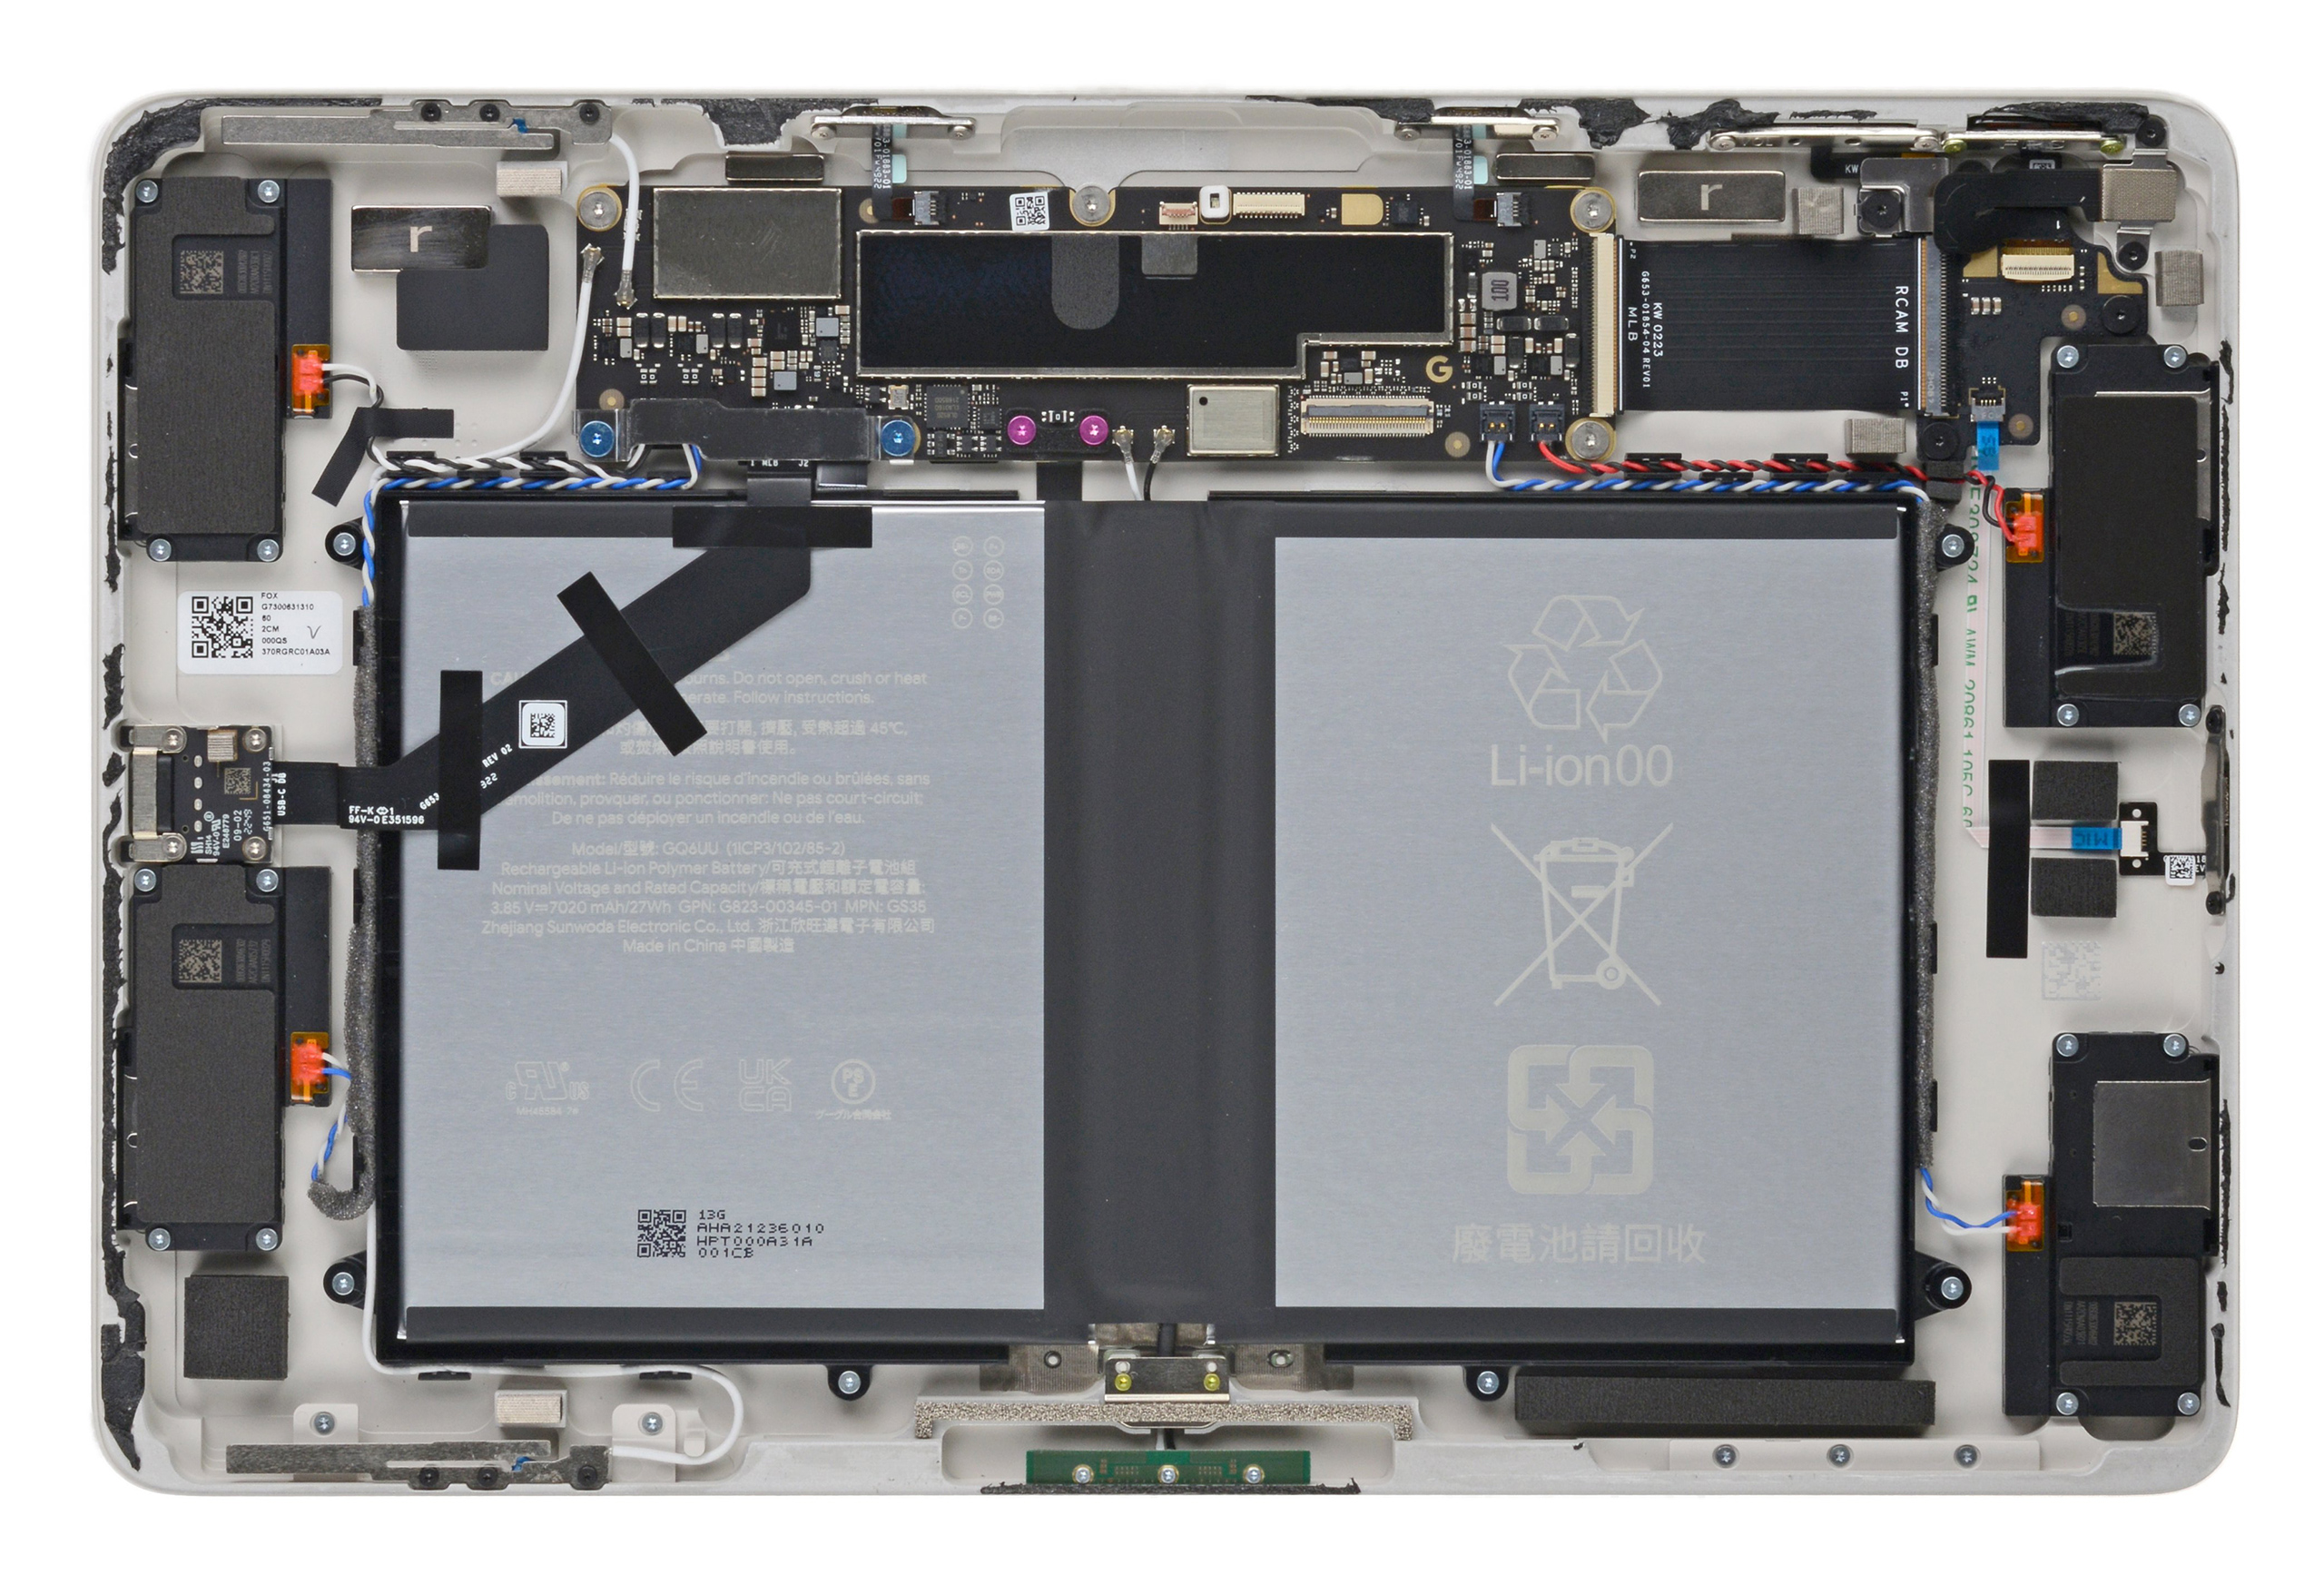 The Pixel Tablet is actually just a few spare parts in a half